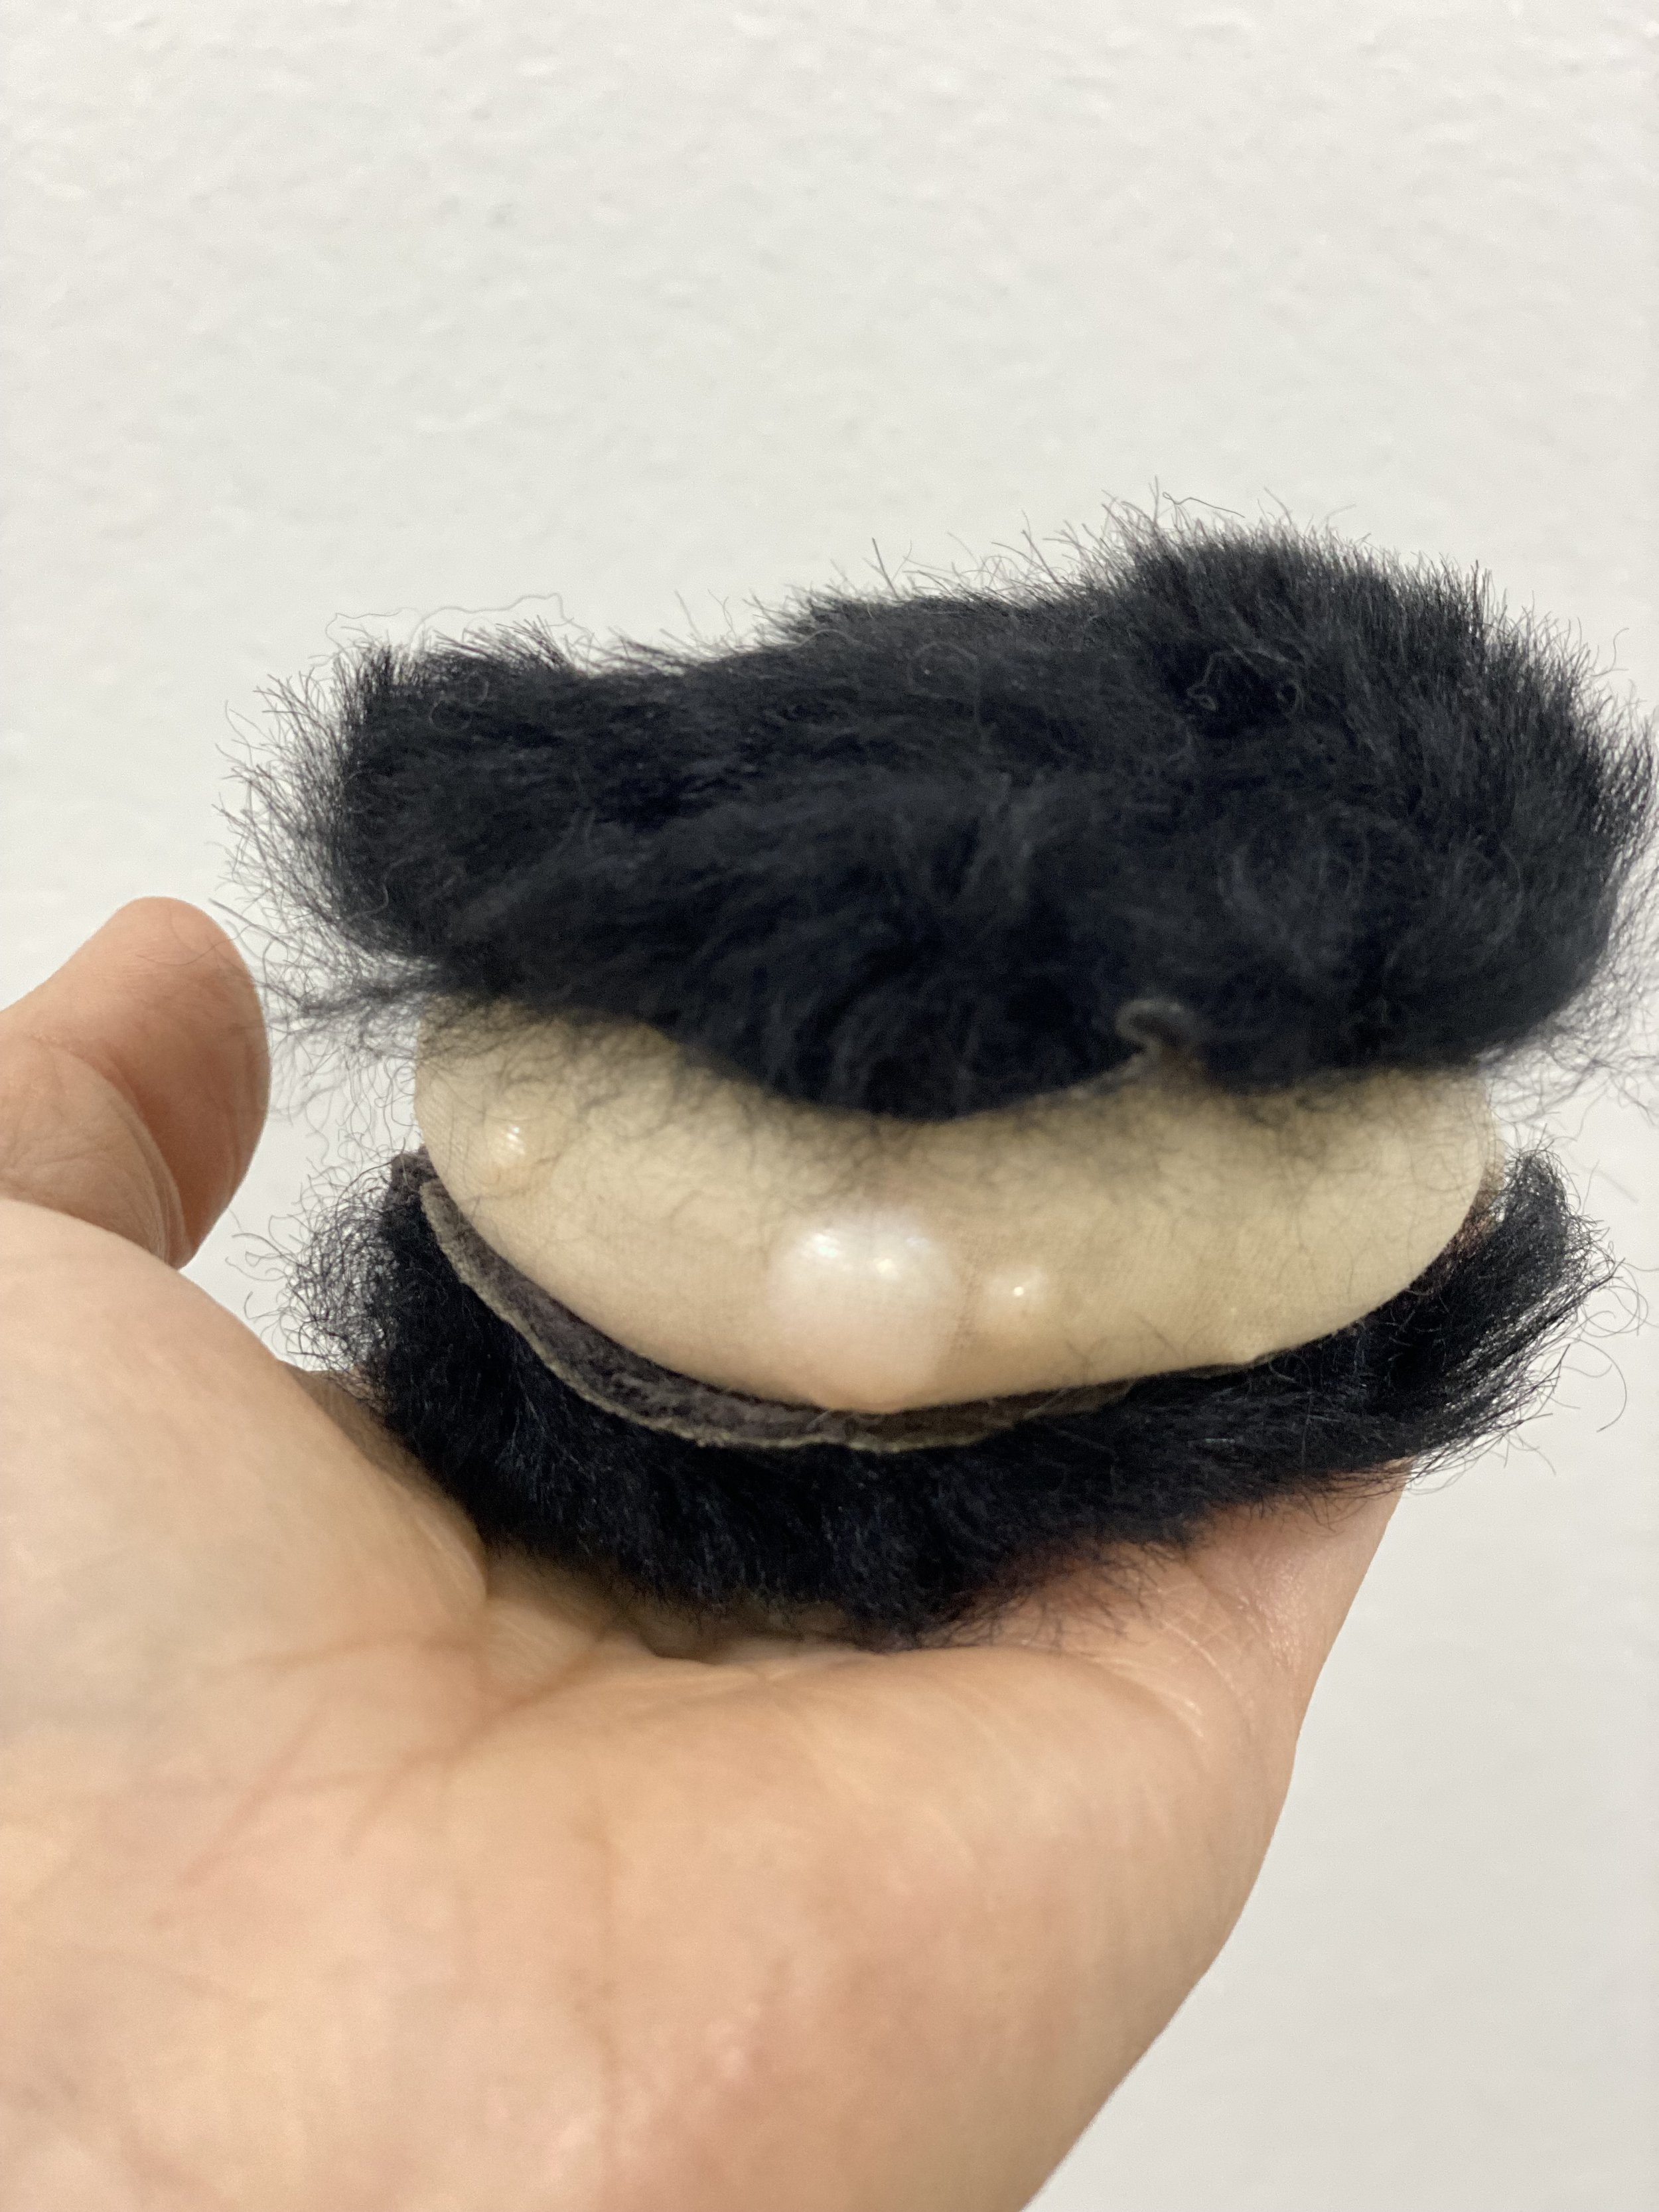 Wen-hao Tien, Oreo cookie sculpture in process, 2022, created with silk, wool, fur, leather, and pearls.